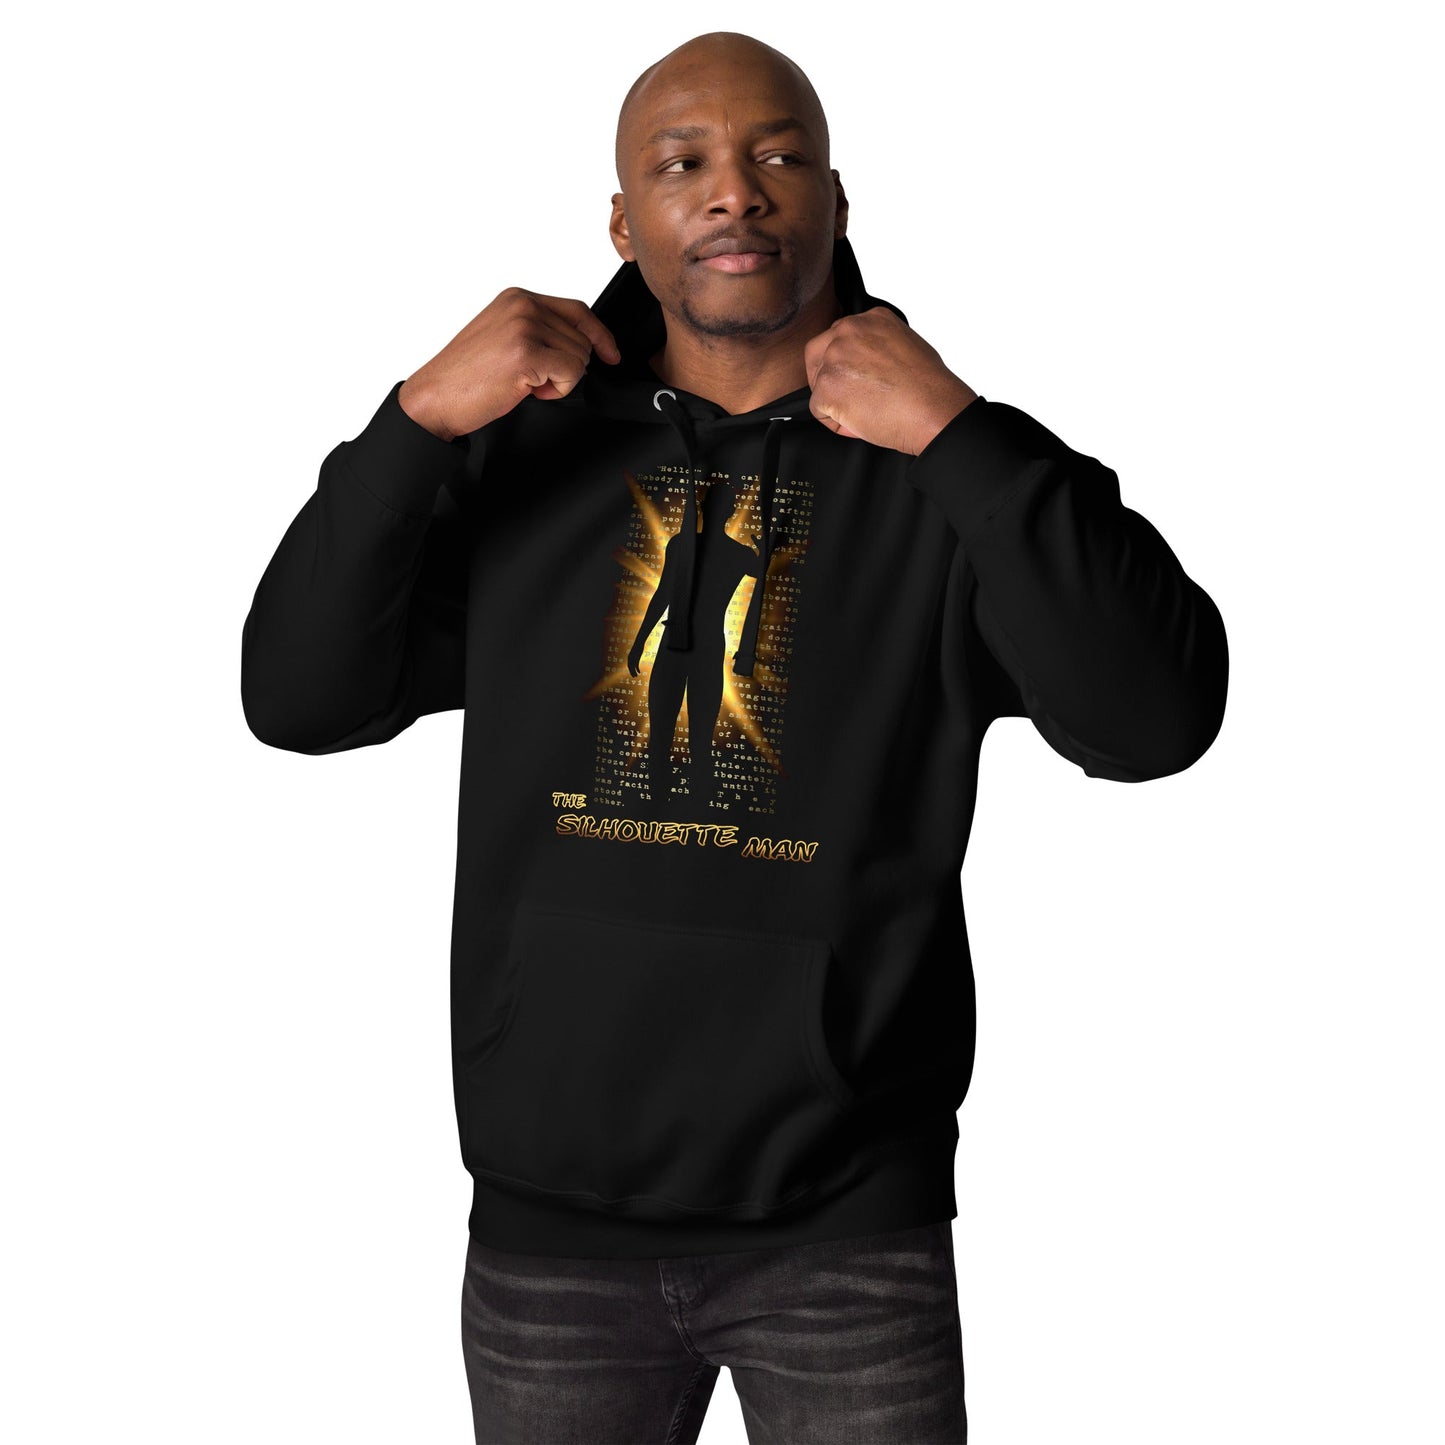 The Silhouette Man | Unisex Hoodie - Wrap Yourself in Shadows - Spectral Ink Shop - Sweaters and Hoodies -9110021_10779